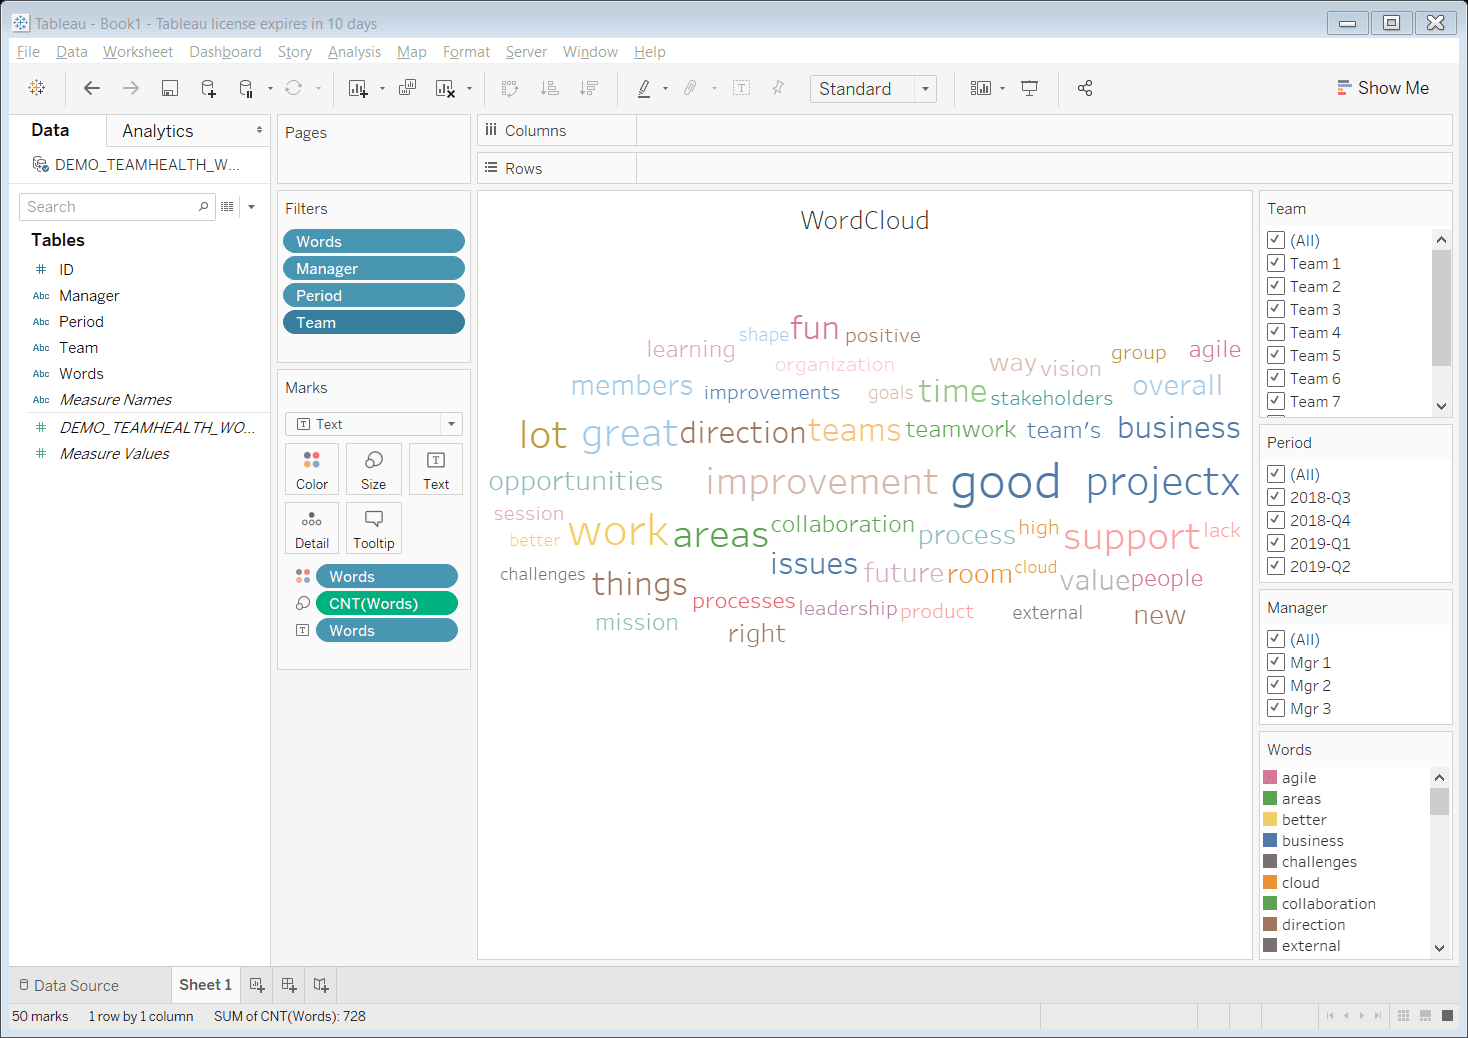 Image showing word cloud